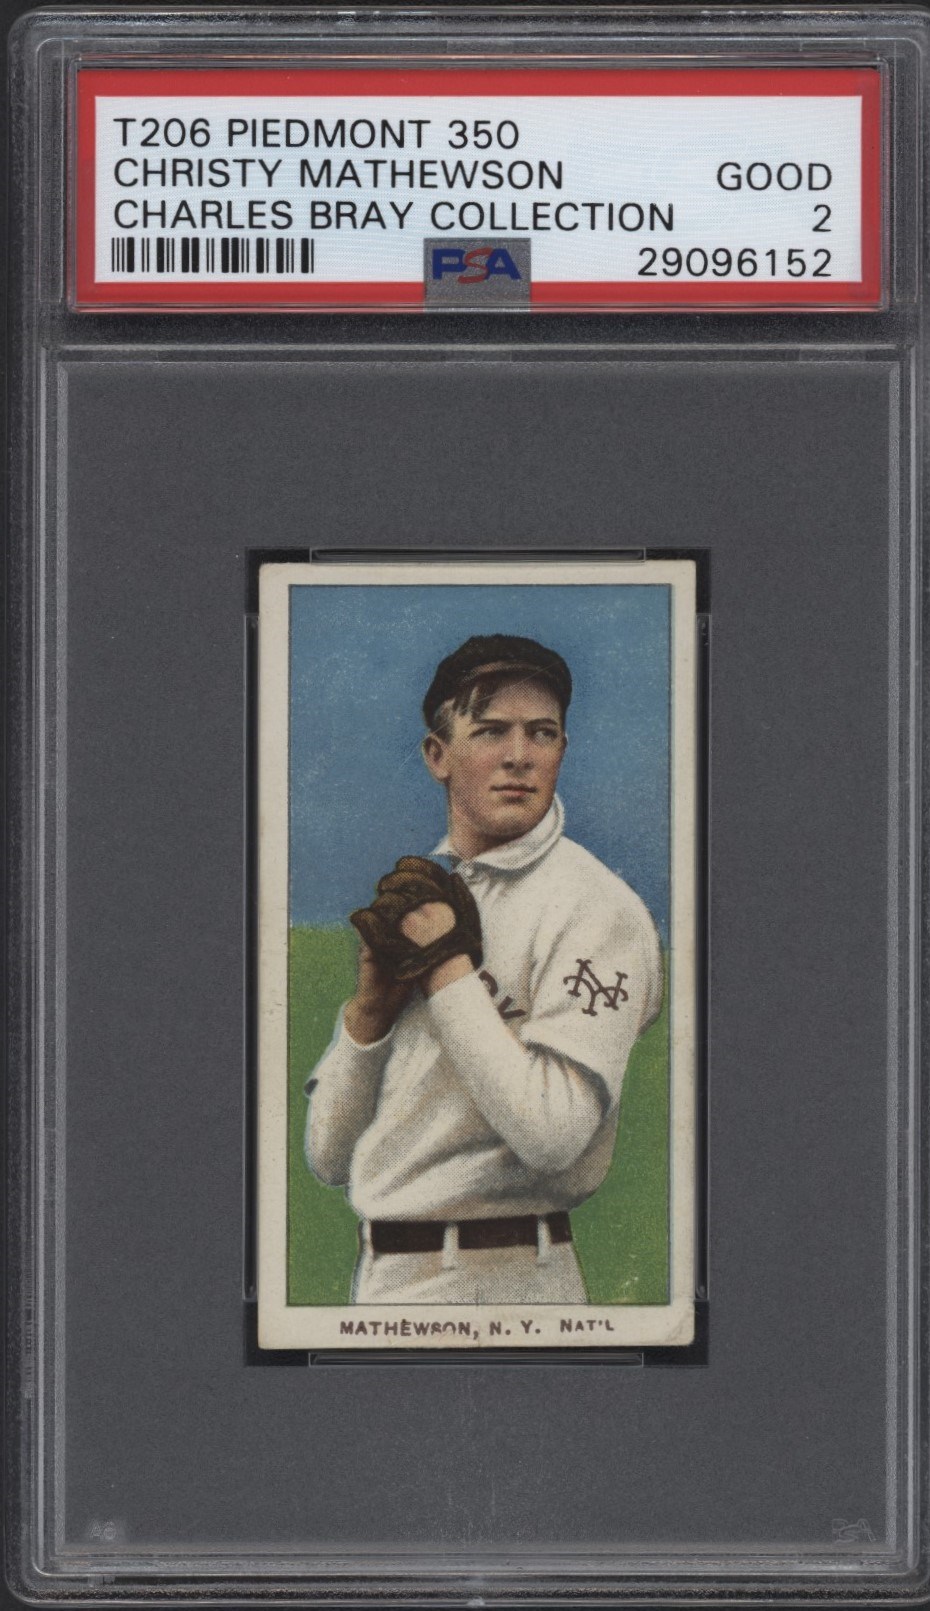 - T206 Piedmont 350 Christy Mathewson PSA Good 2 From the Charles Bray Collection